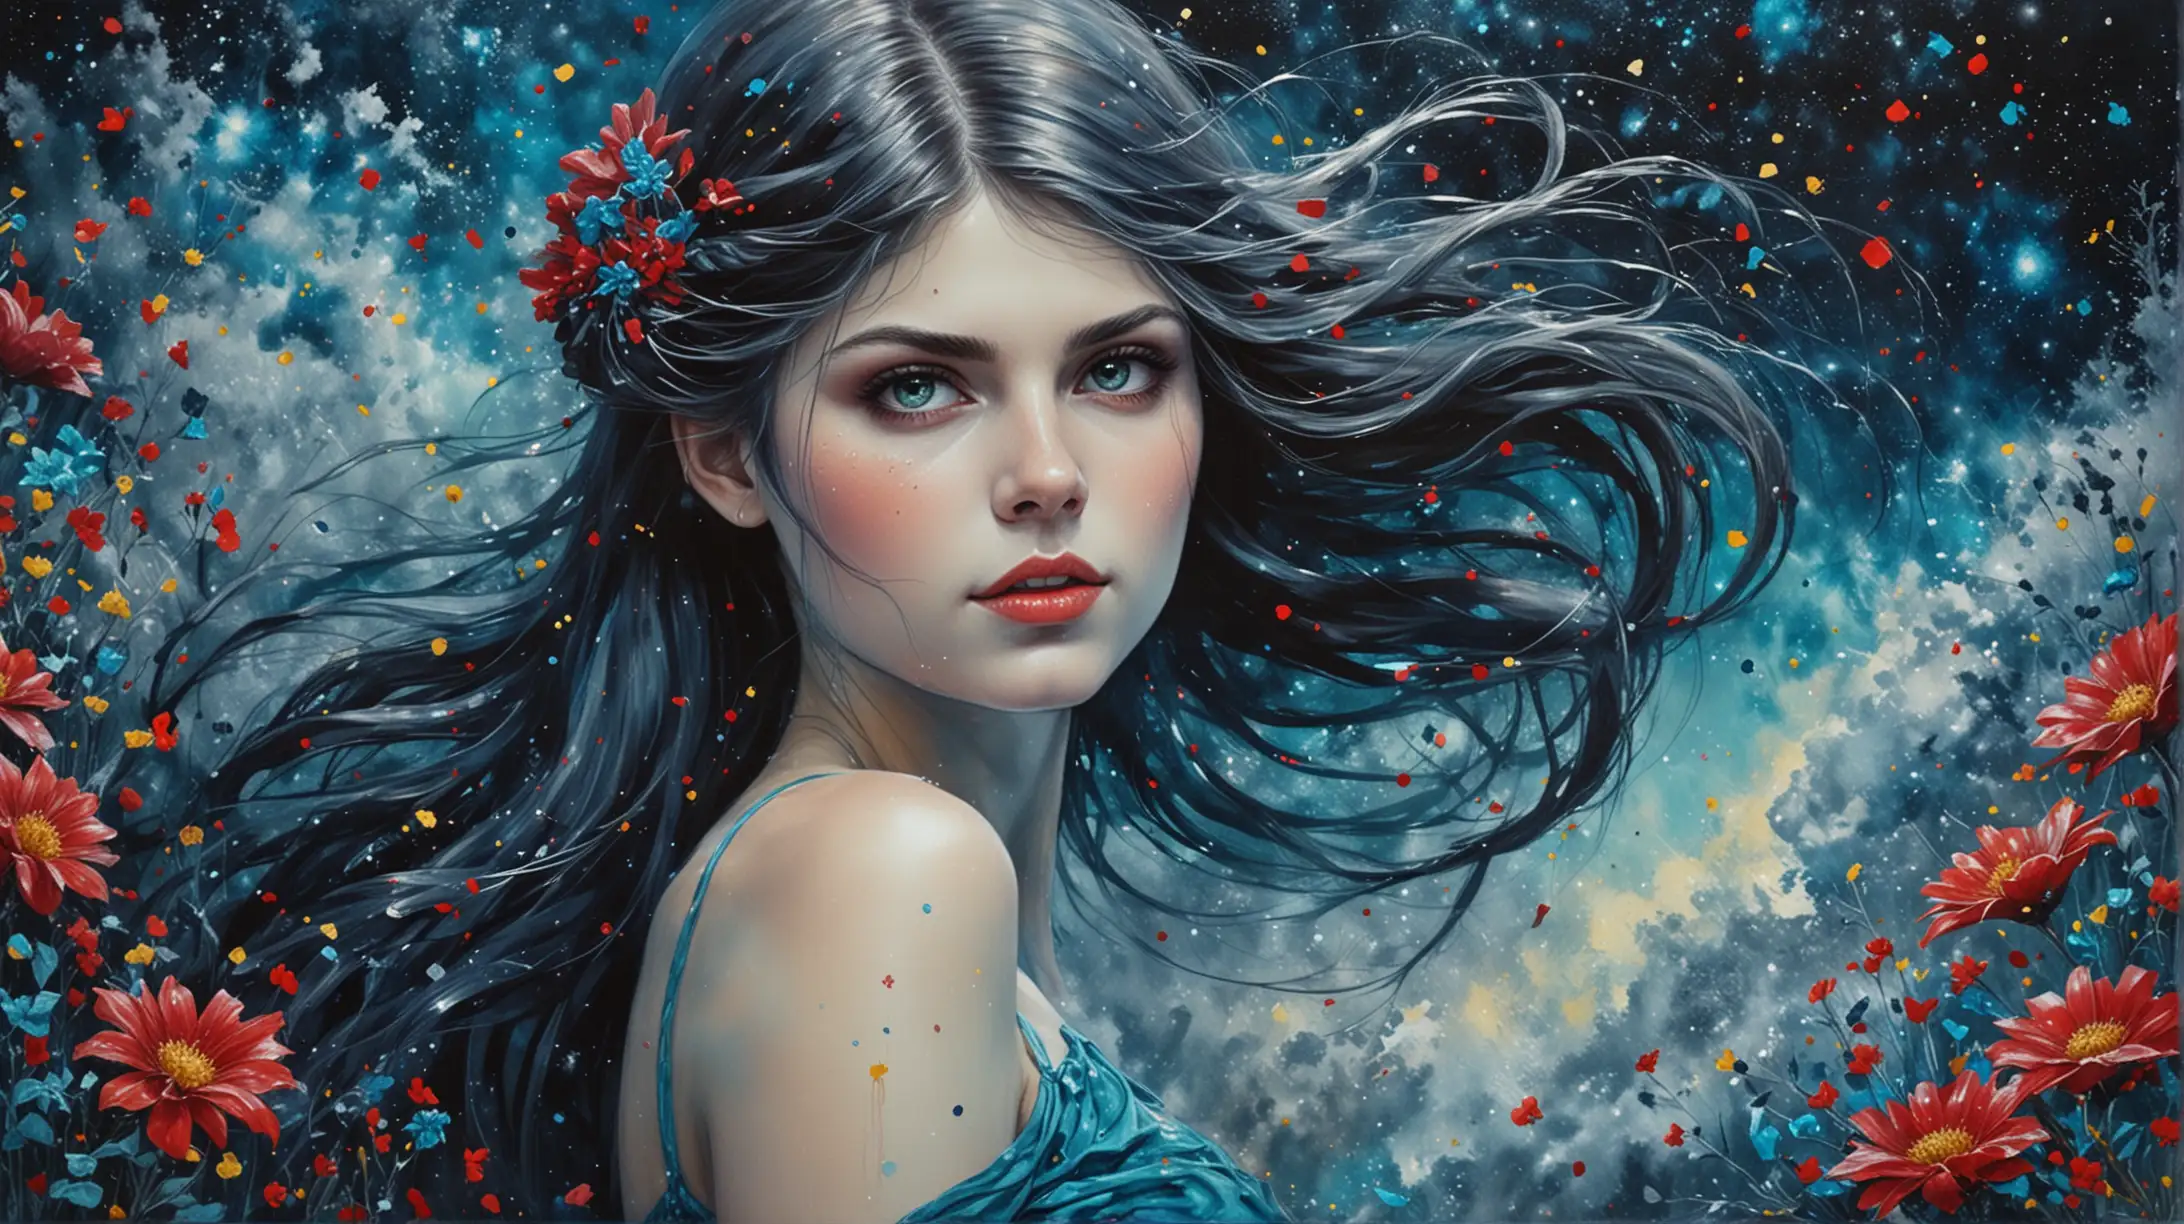 anime, watercolor, Alexandra Daddario, sexy celtic elegant girl, pigtails, romance, love, textured oil painting of abstract art of florescent colors Turquoise and dark blue in silver dust and a magical turquoise glow with luminescent red and yellow flowers among galaxies